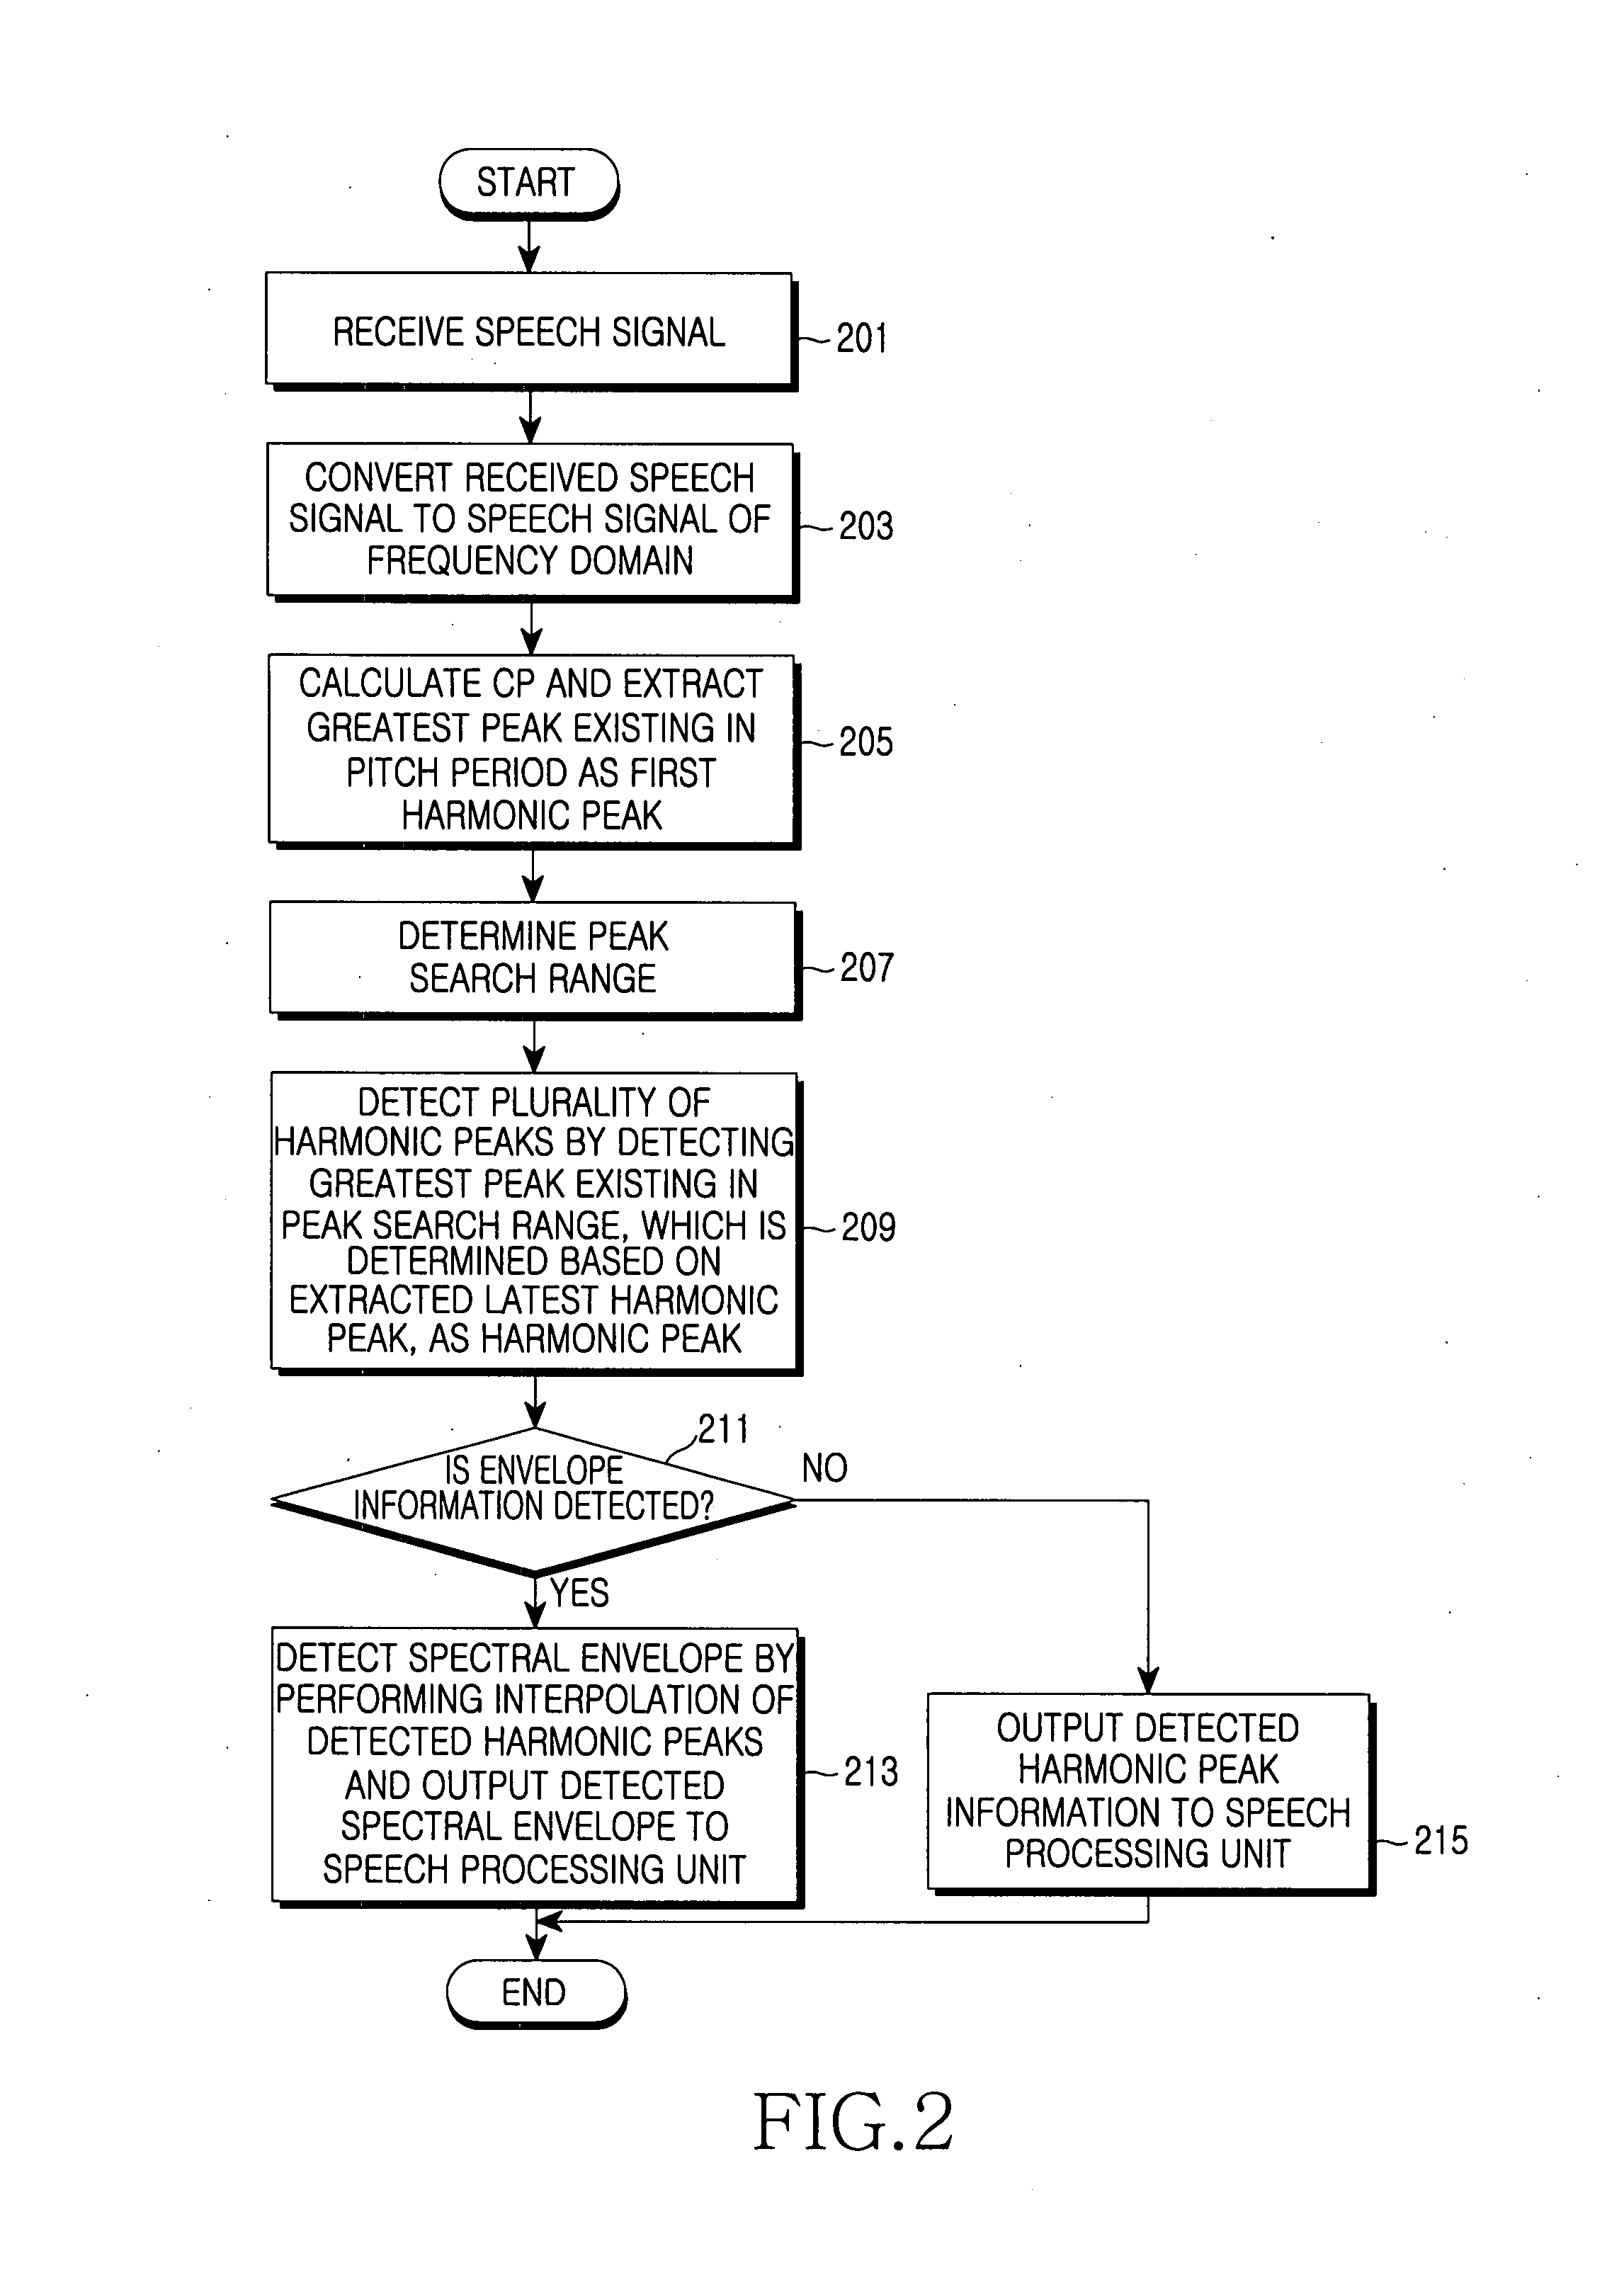 Method and apparatus for estimating harmonic information, spectral envelope information, and degree of voicing of speech signal